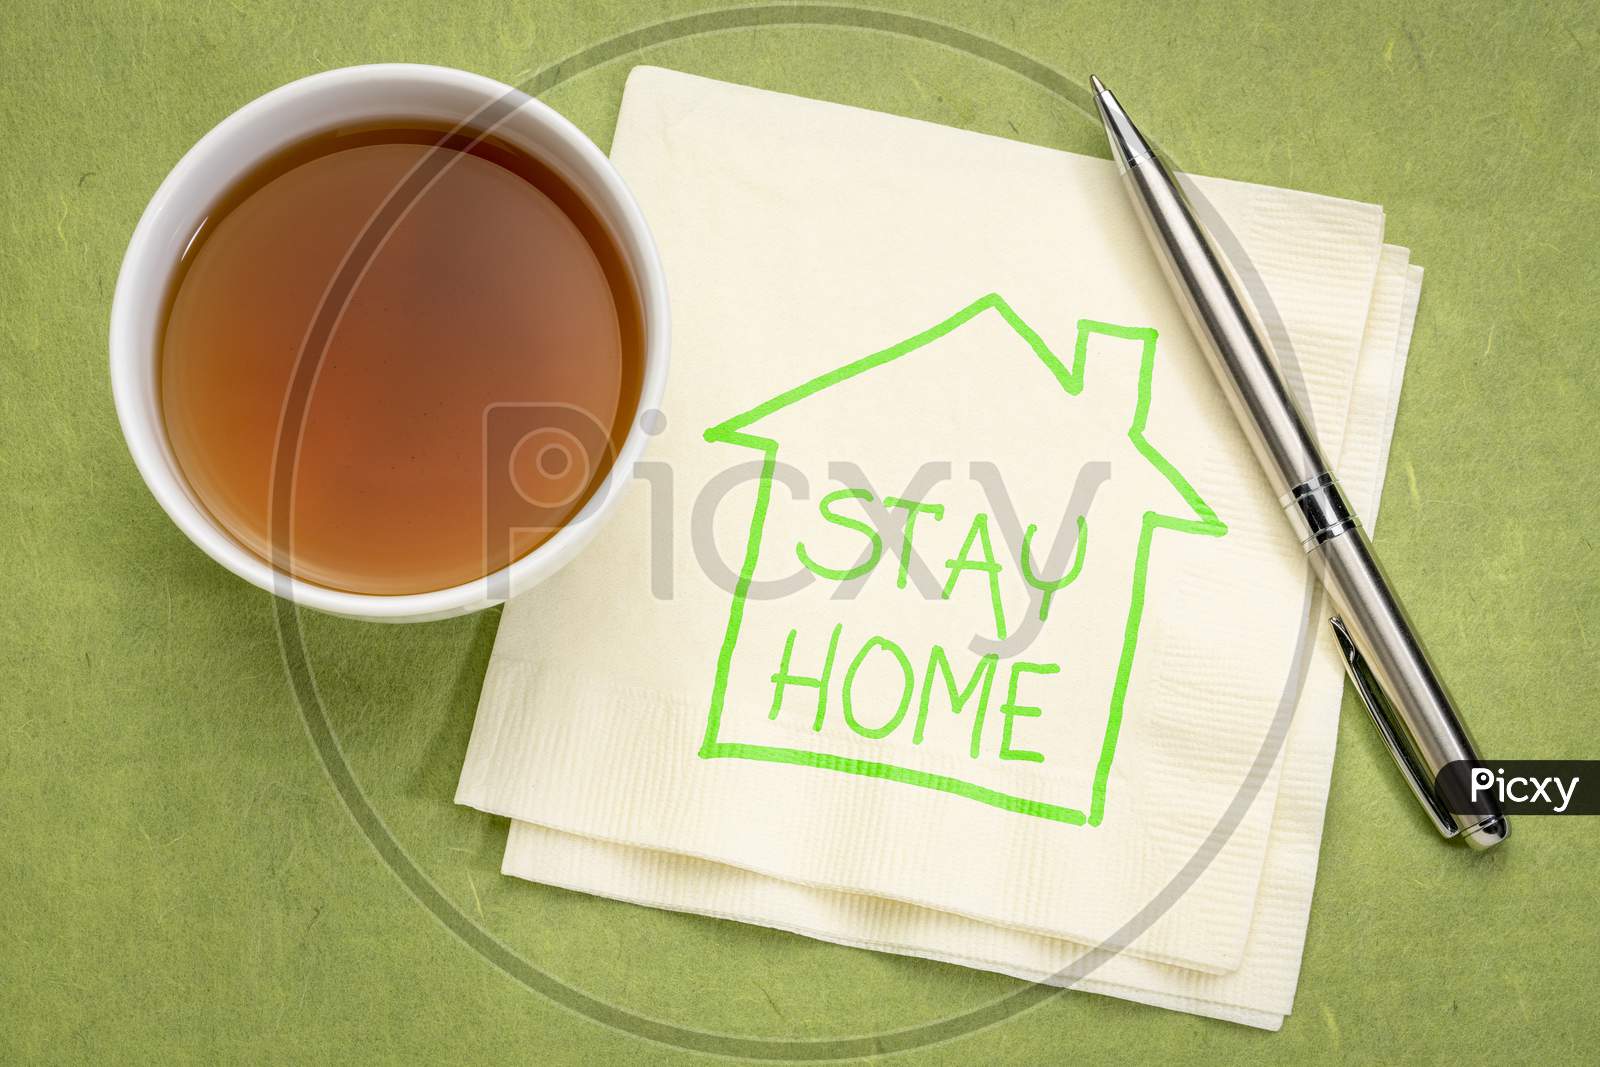 Stay Home Reminder During Coronavirus Pandemic - Napkin Doodle With A Cup Of Tea, Social Distancing Concept